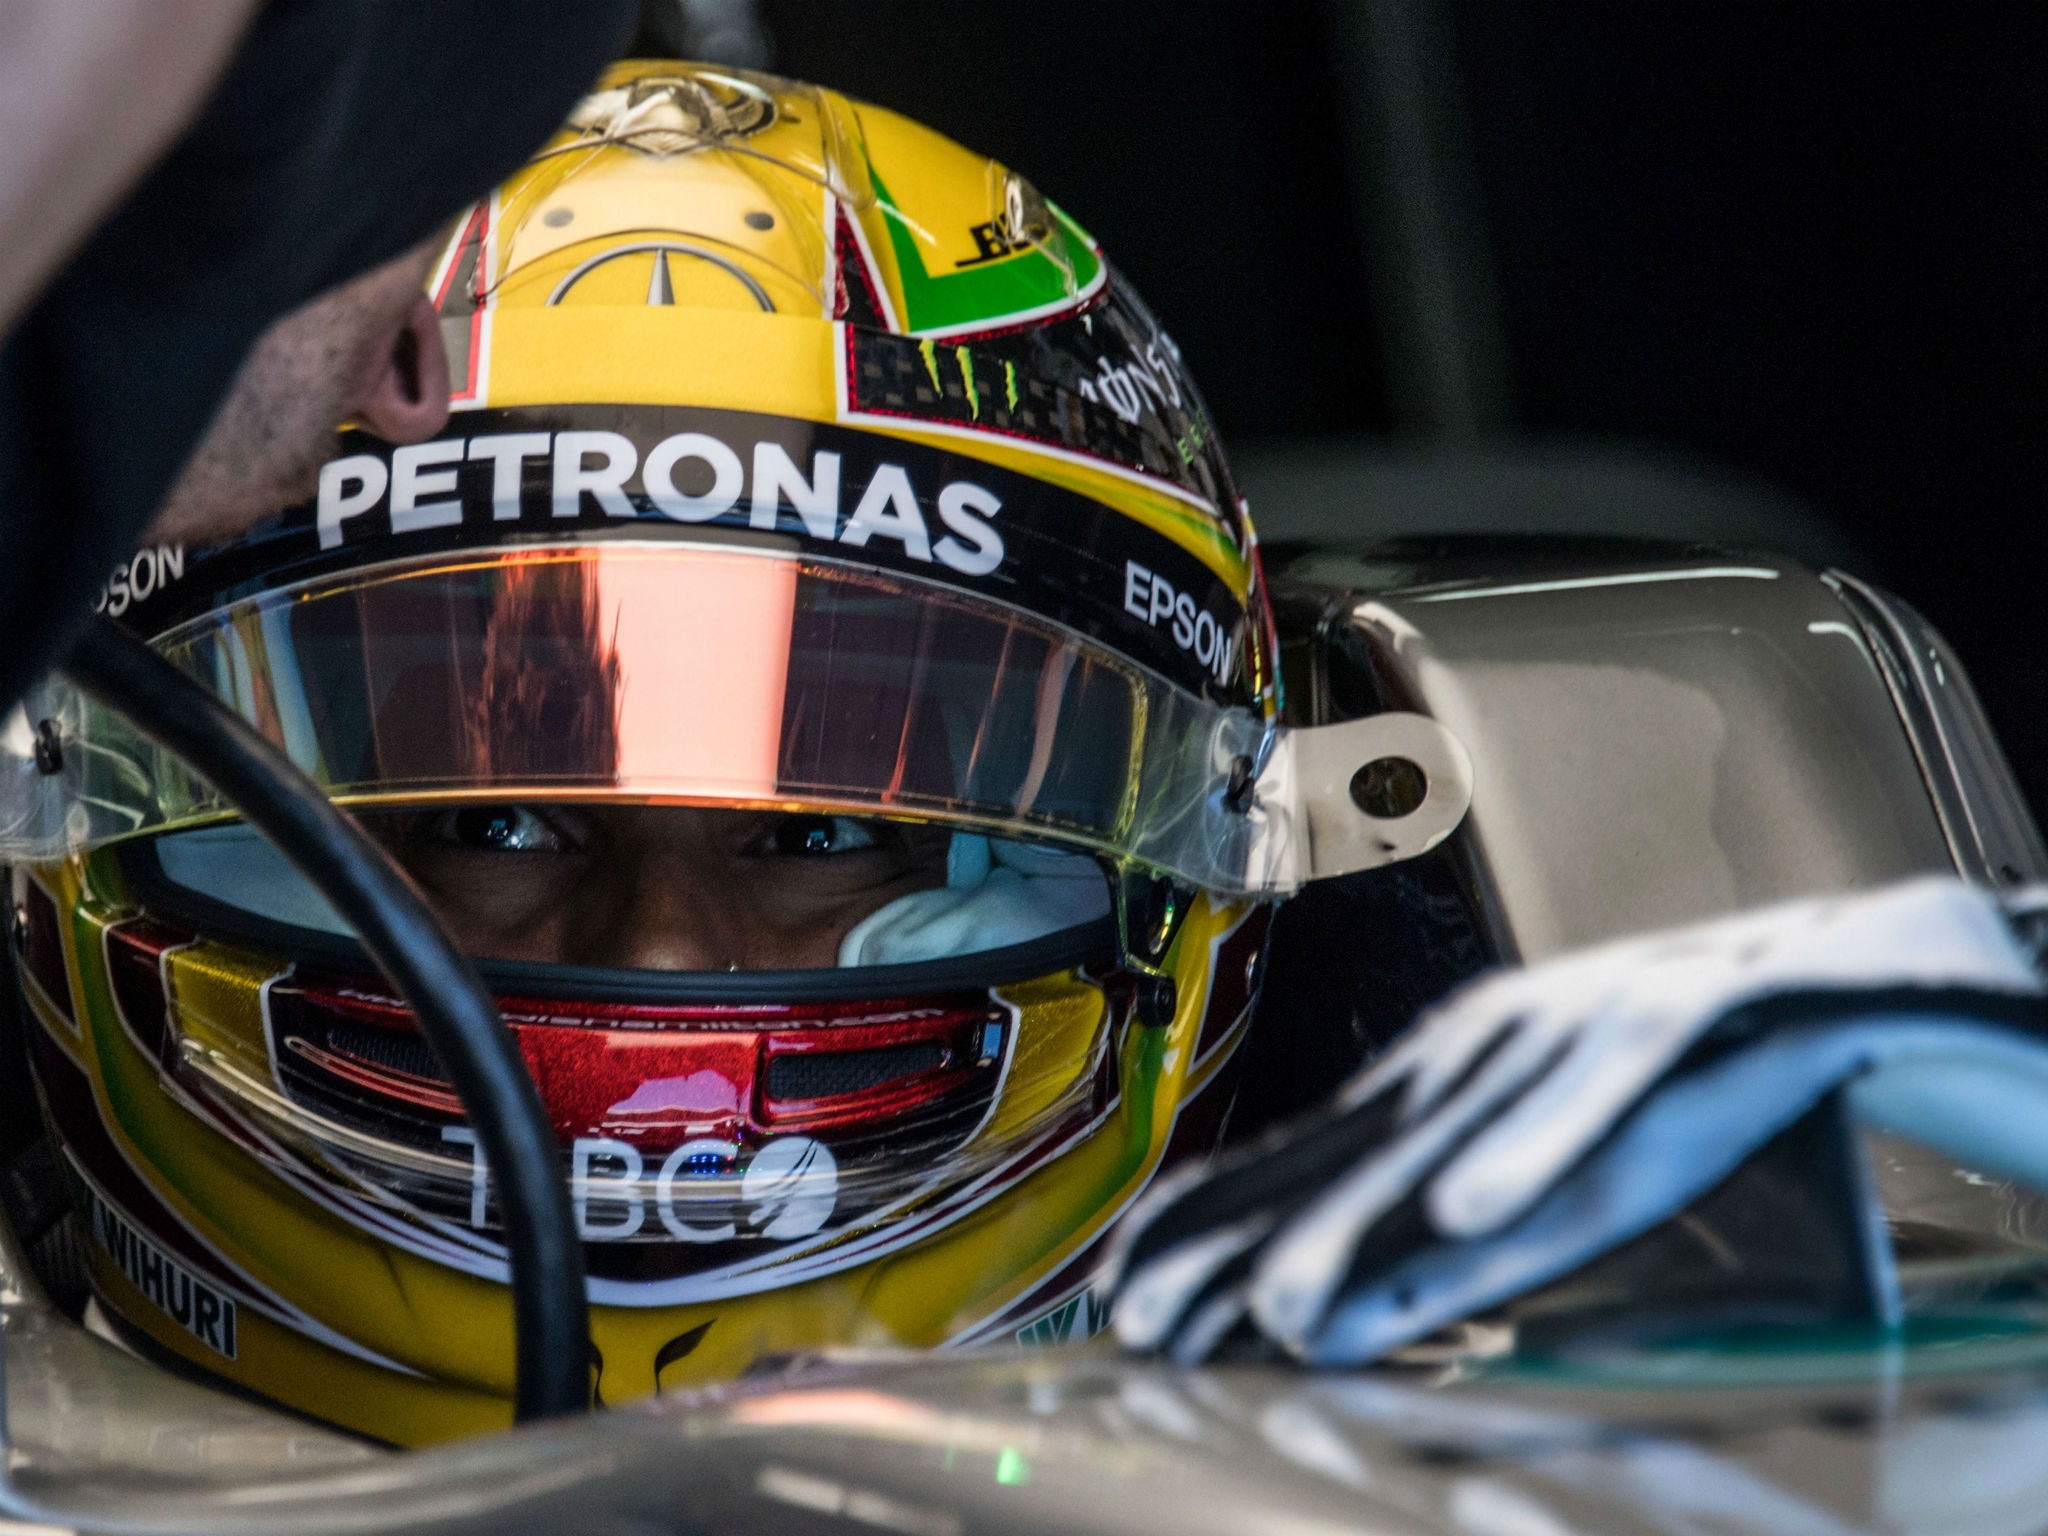 Hamilton is looking to secure his world title victory in Brazil